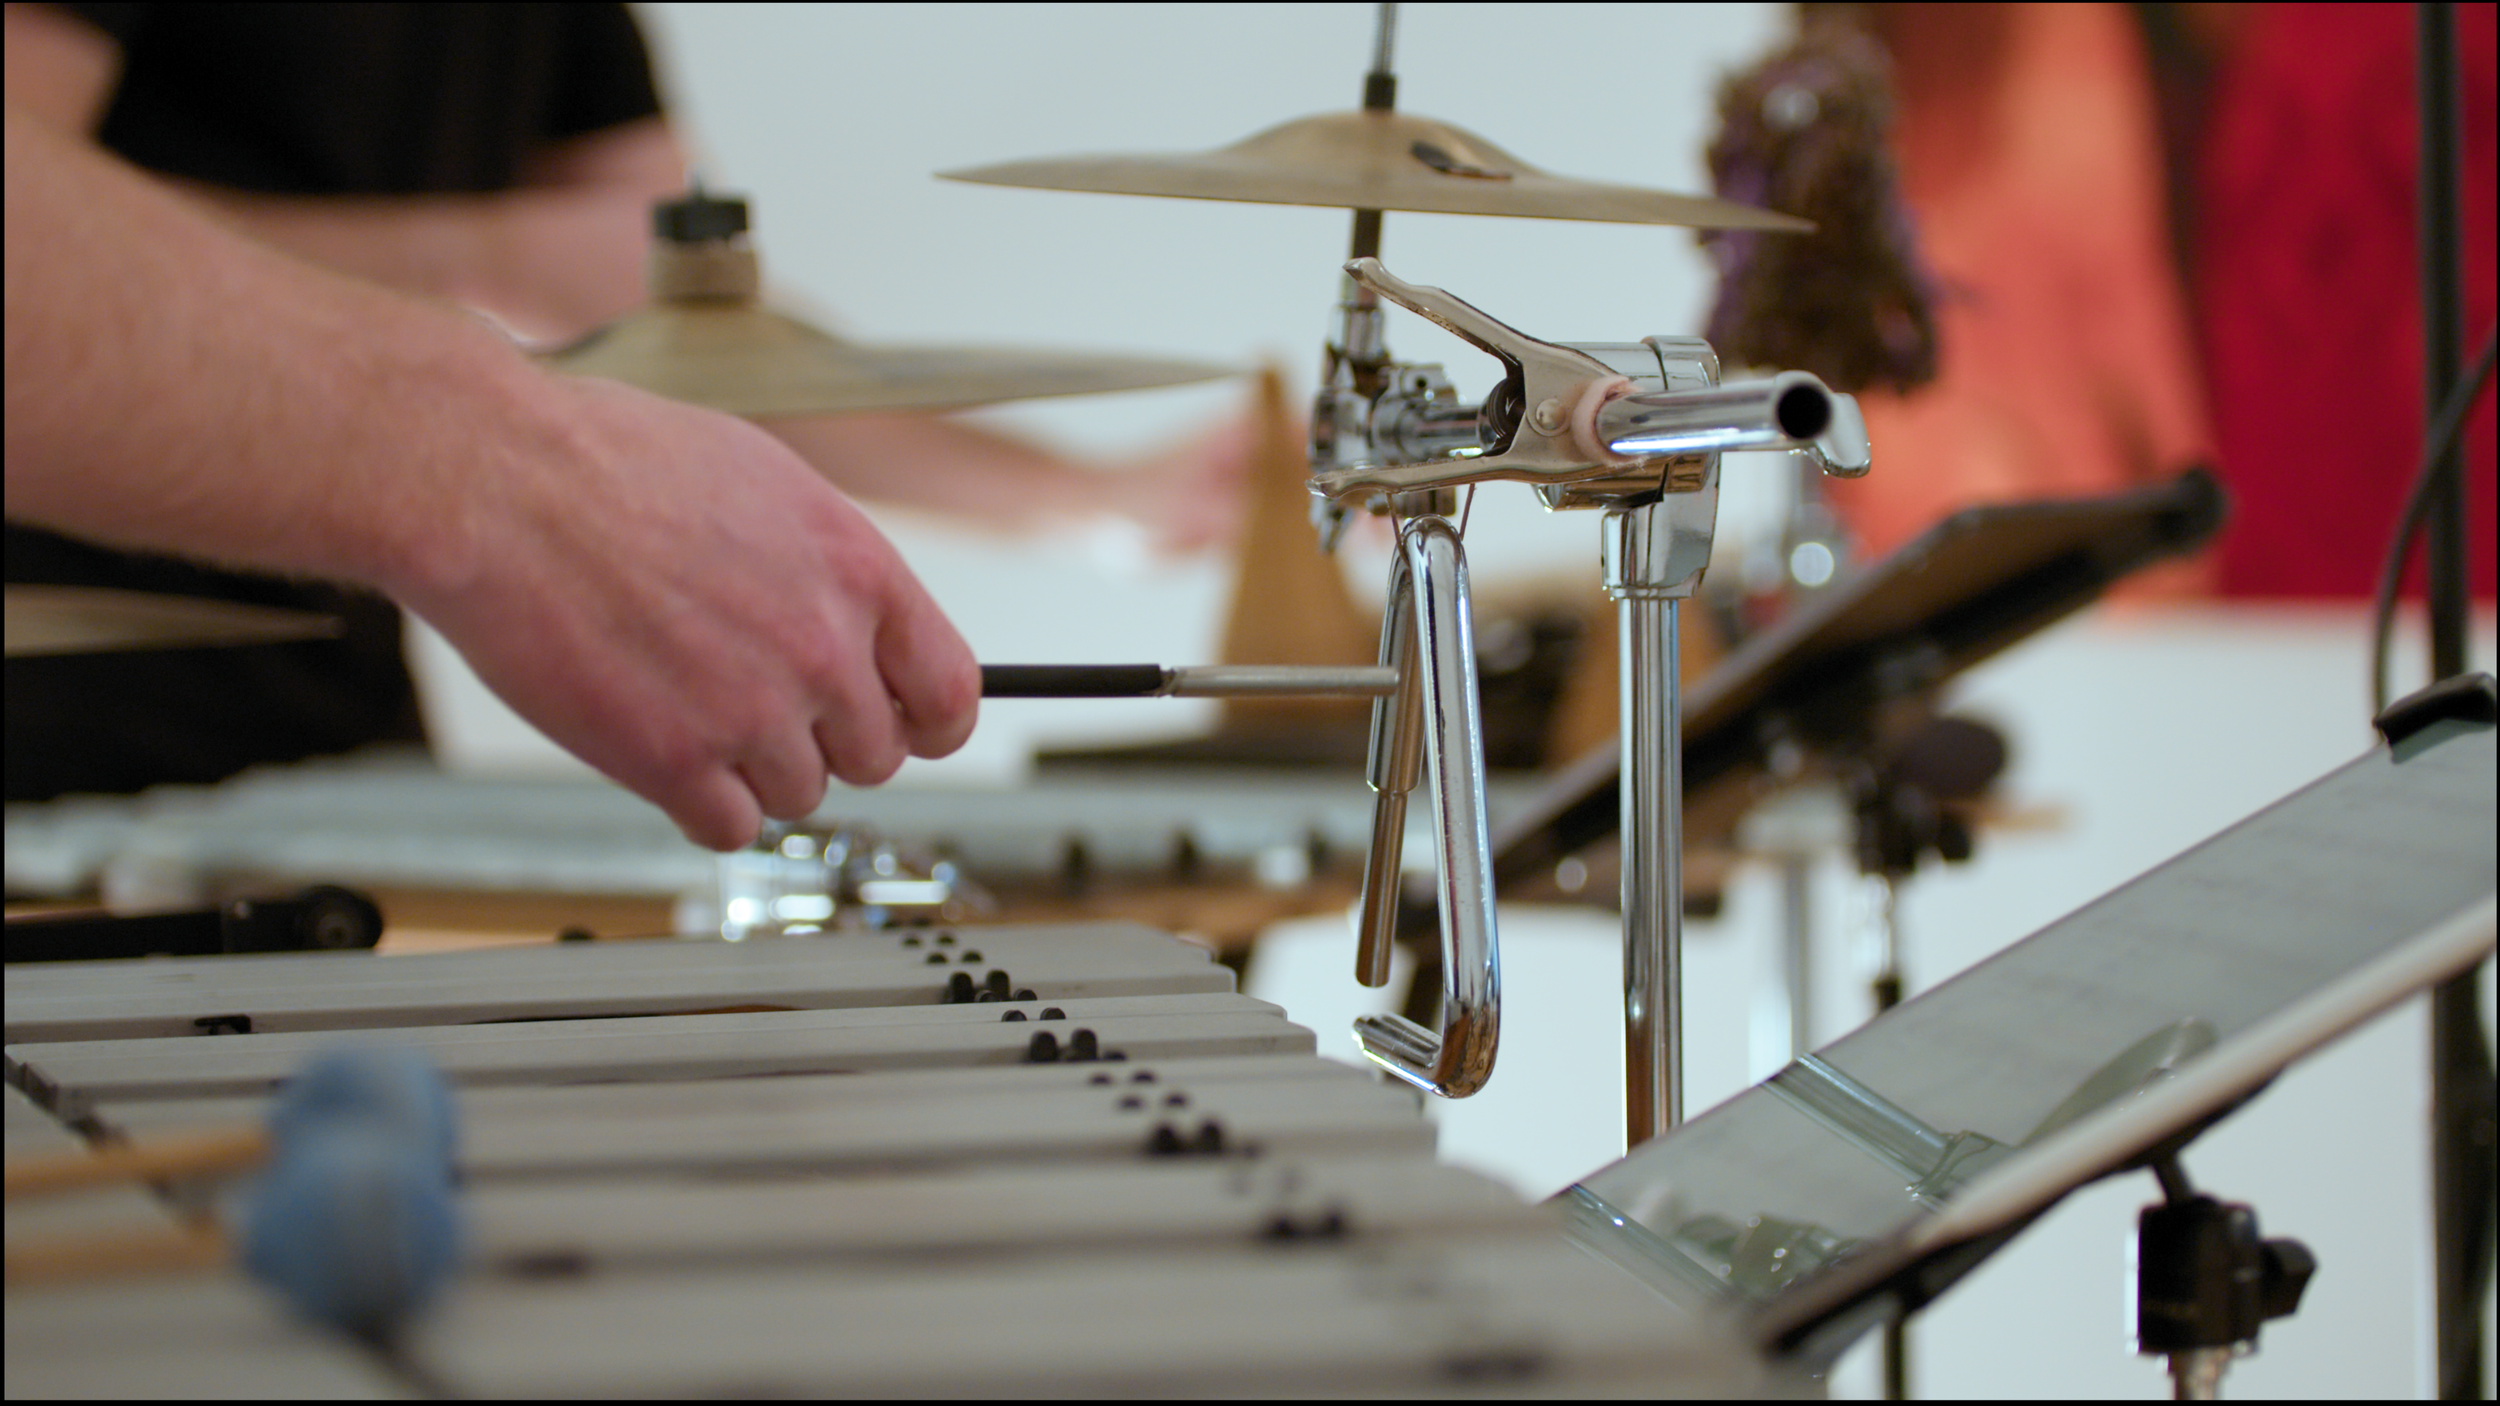 6. A close-up image of a percussionist playing a silver metal triangle with a metal triangle beater.